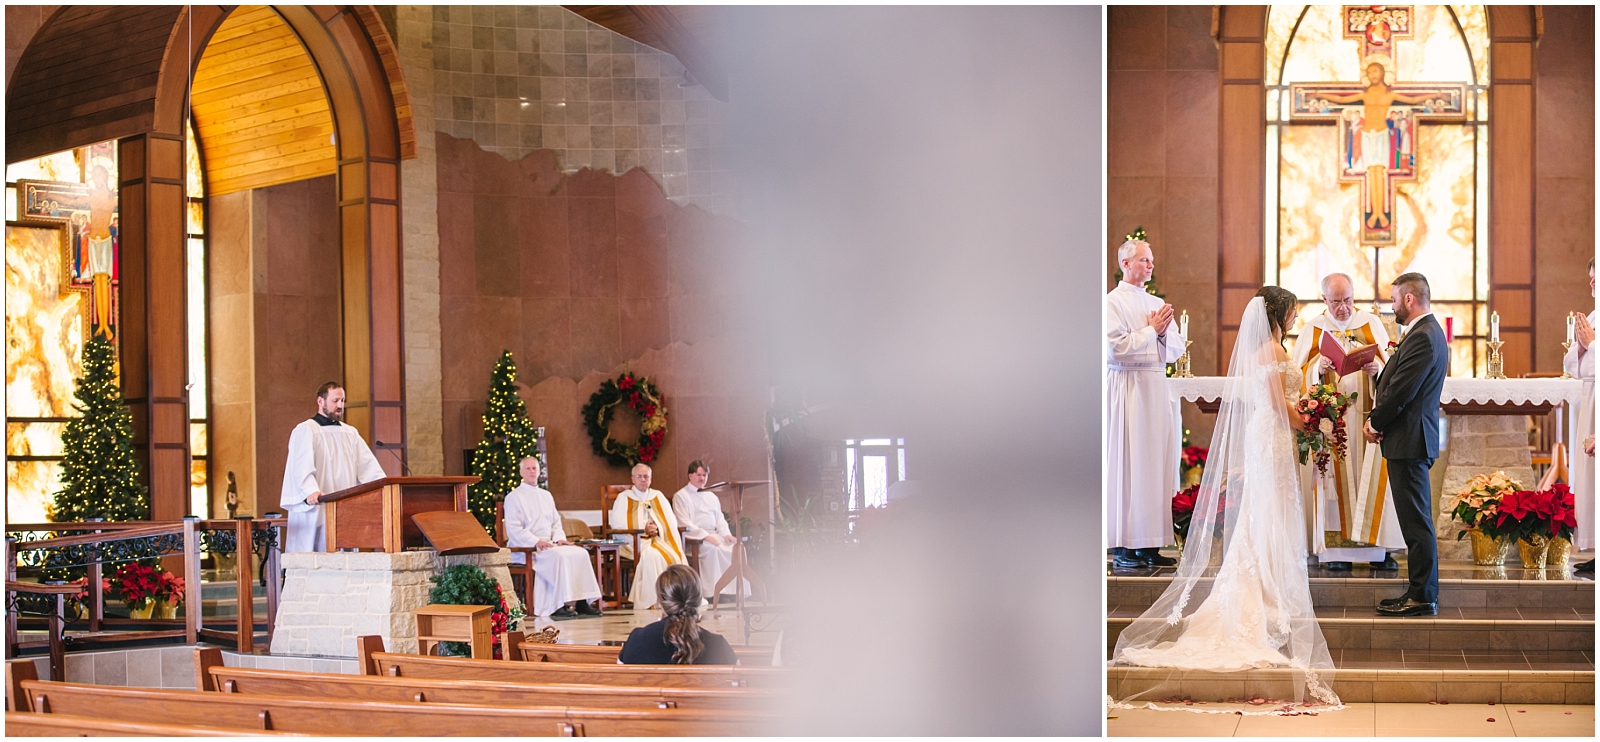 Priests conducting wedding ceremony at St Francis of Assisi Catholic Church